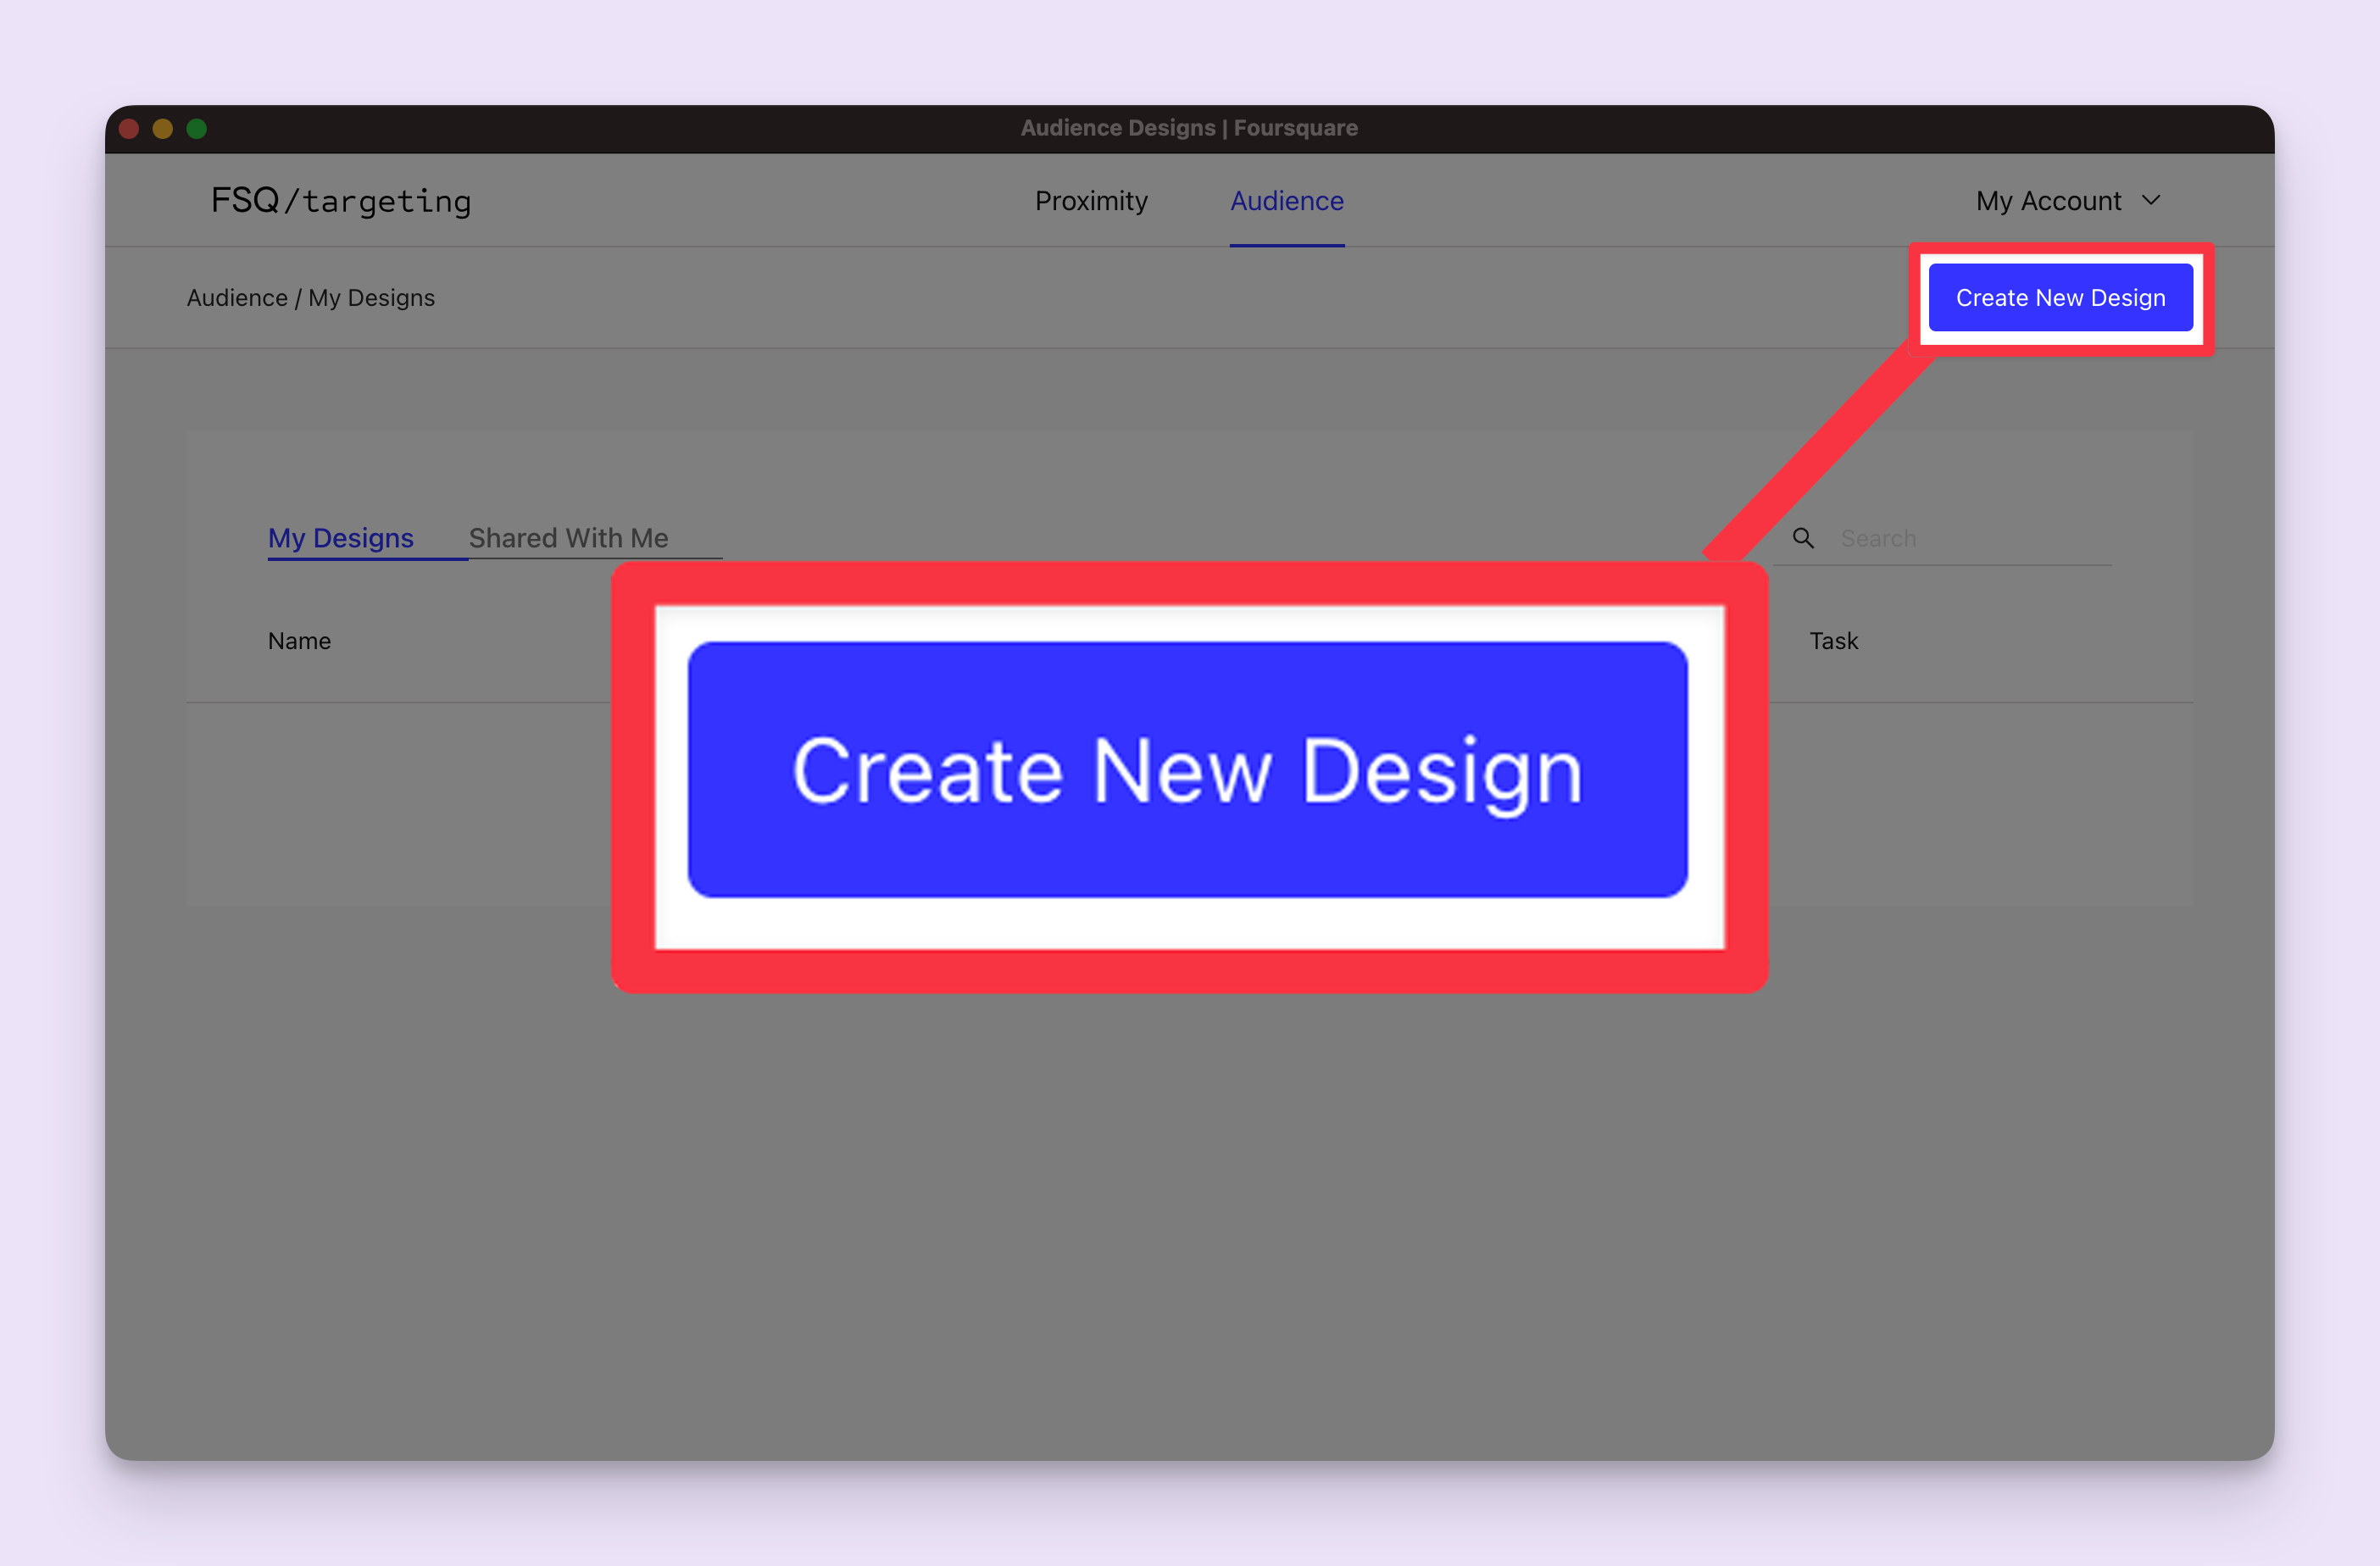 The Create New Design button on the audience panel.